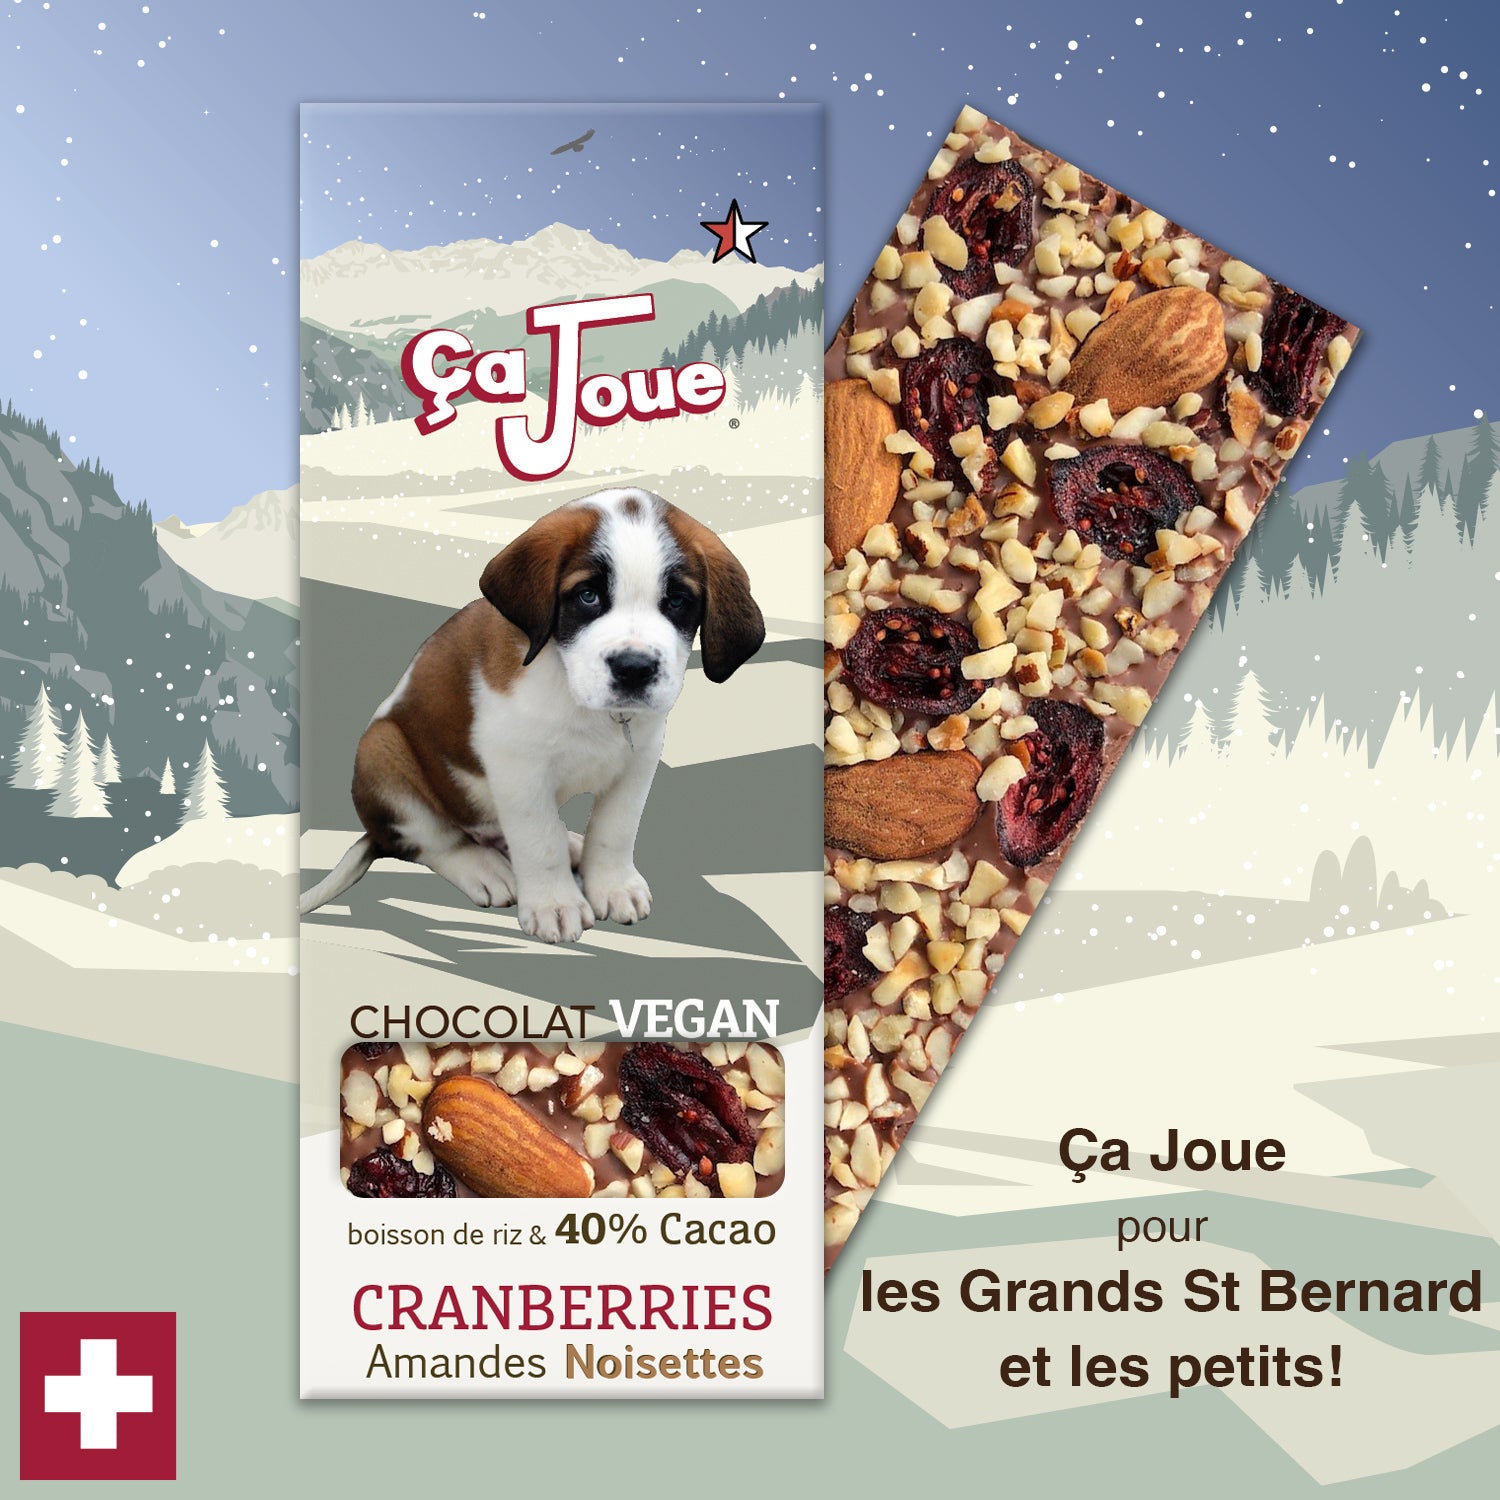 Ça Joue for the for little St Bernards (Ref-BV5) Chocolate from Val de Bagnes